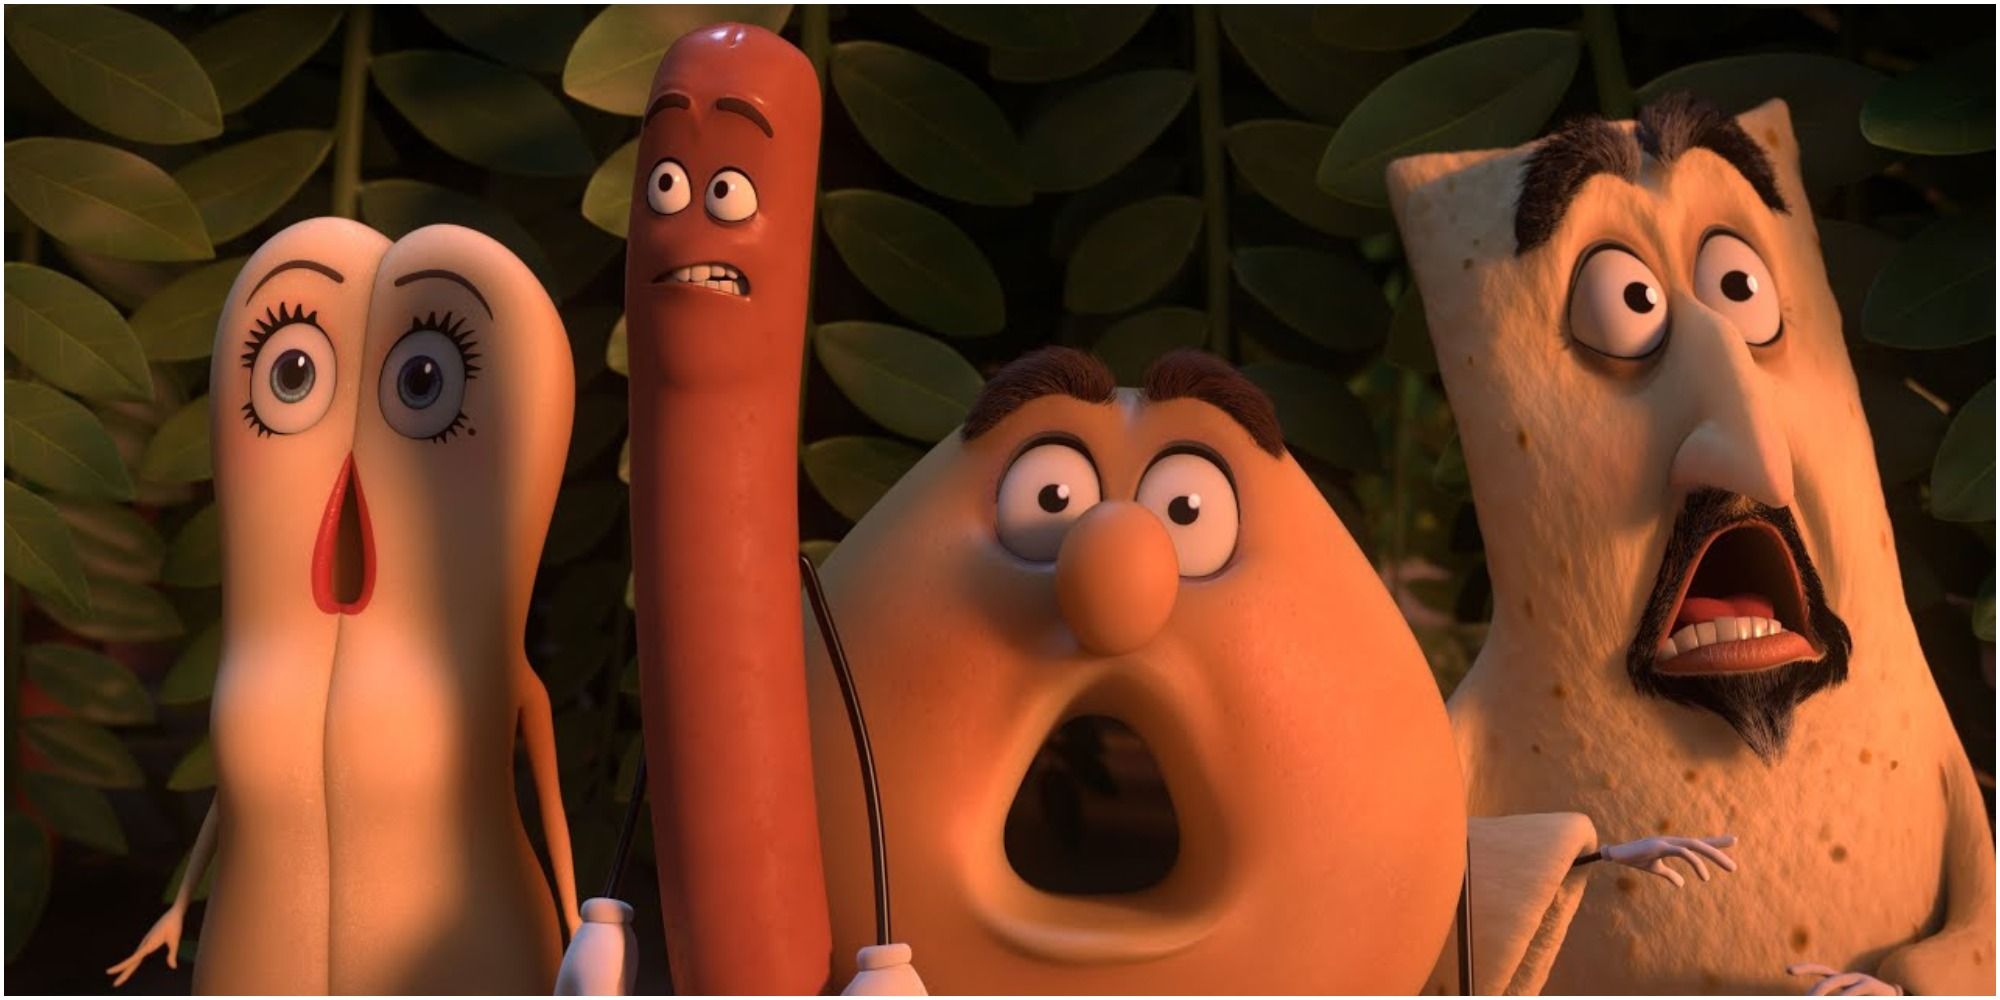 Food looking shocked in grocery store in Sausage Party.